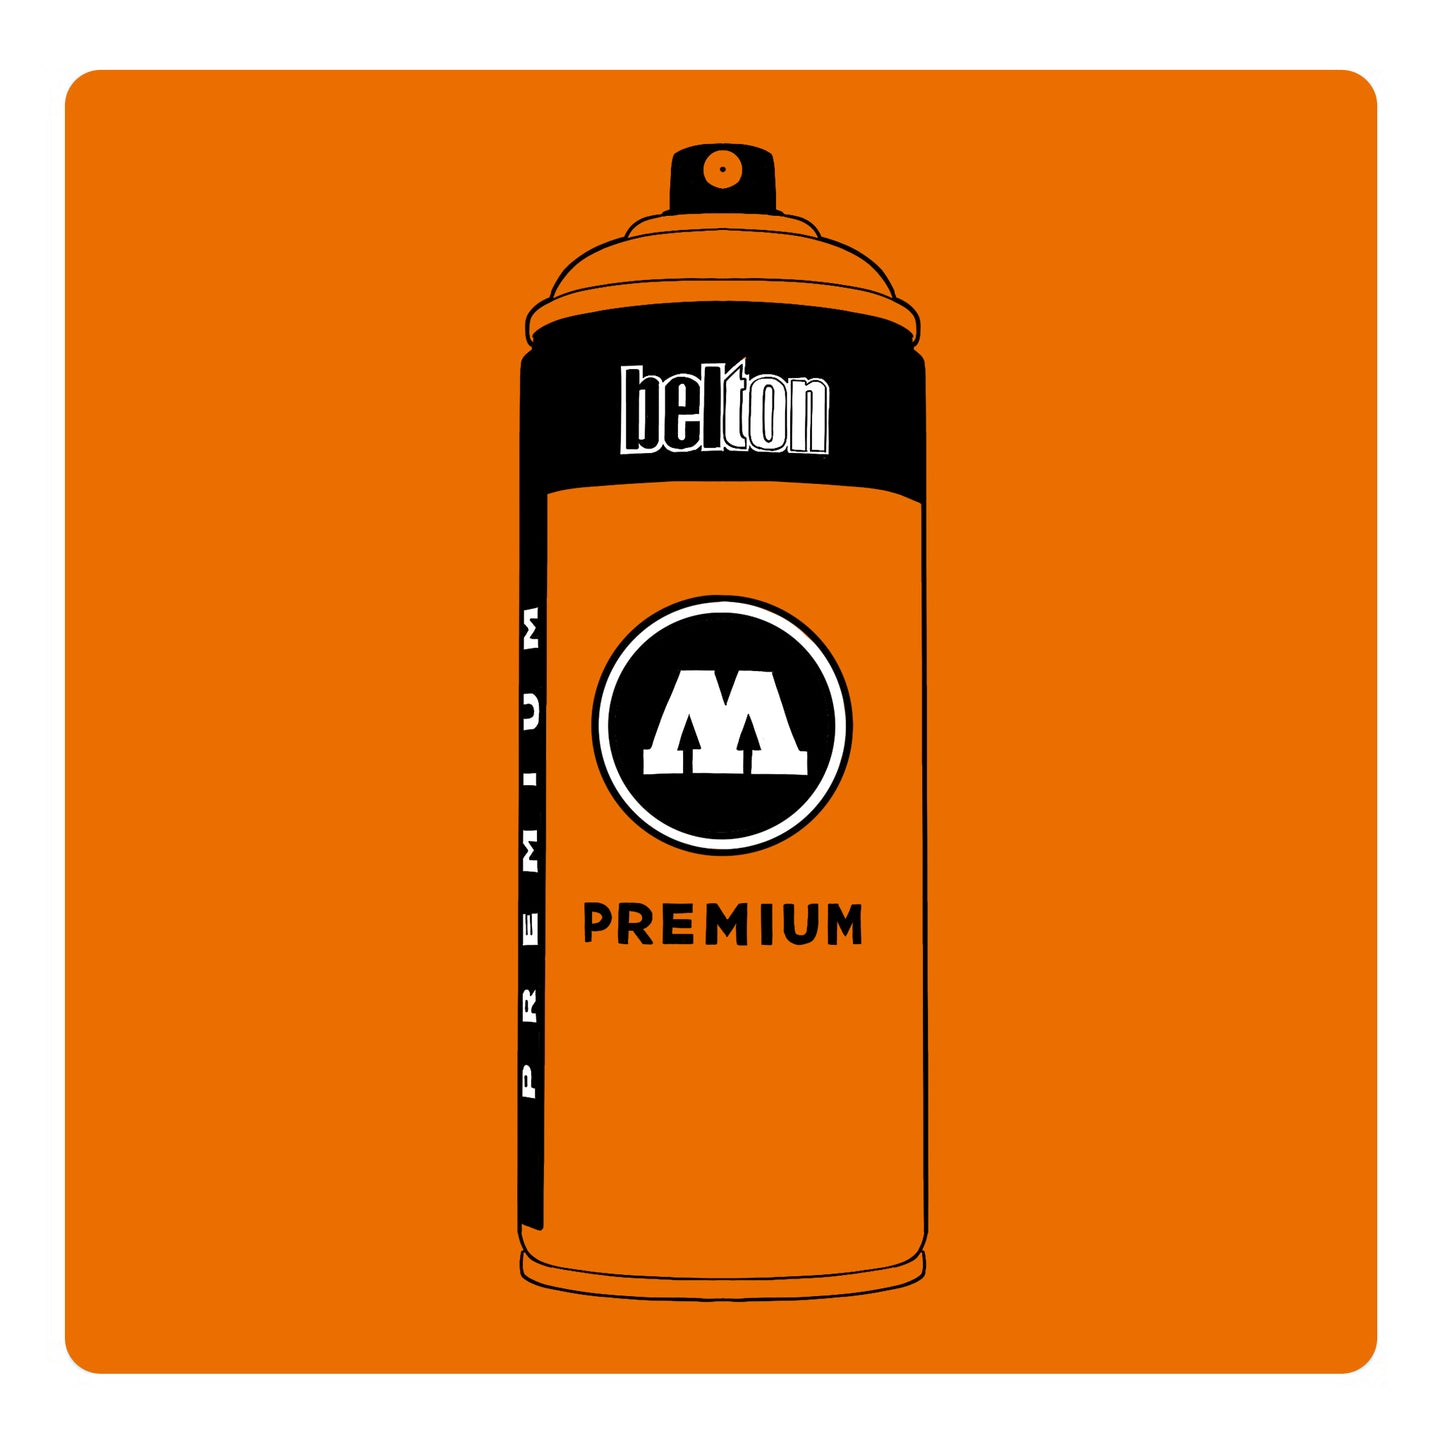 A black outline drawing of a tangerine orange spray paint can with the words "belton","premium" and the letter"M" written on the face in black and white font. The background is a color swatch of the same tangerine orange with a white border.